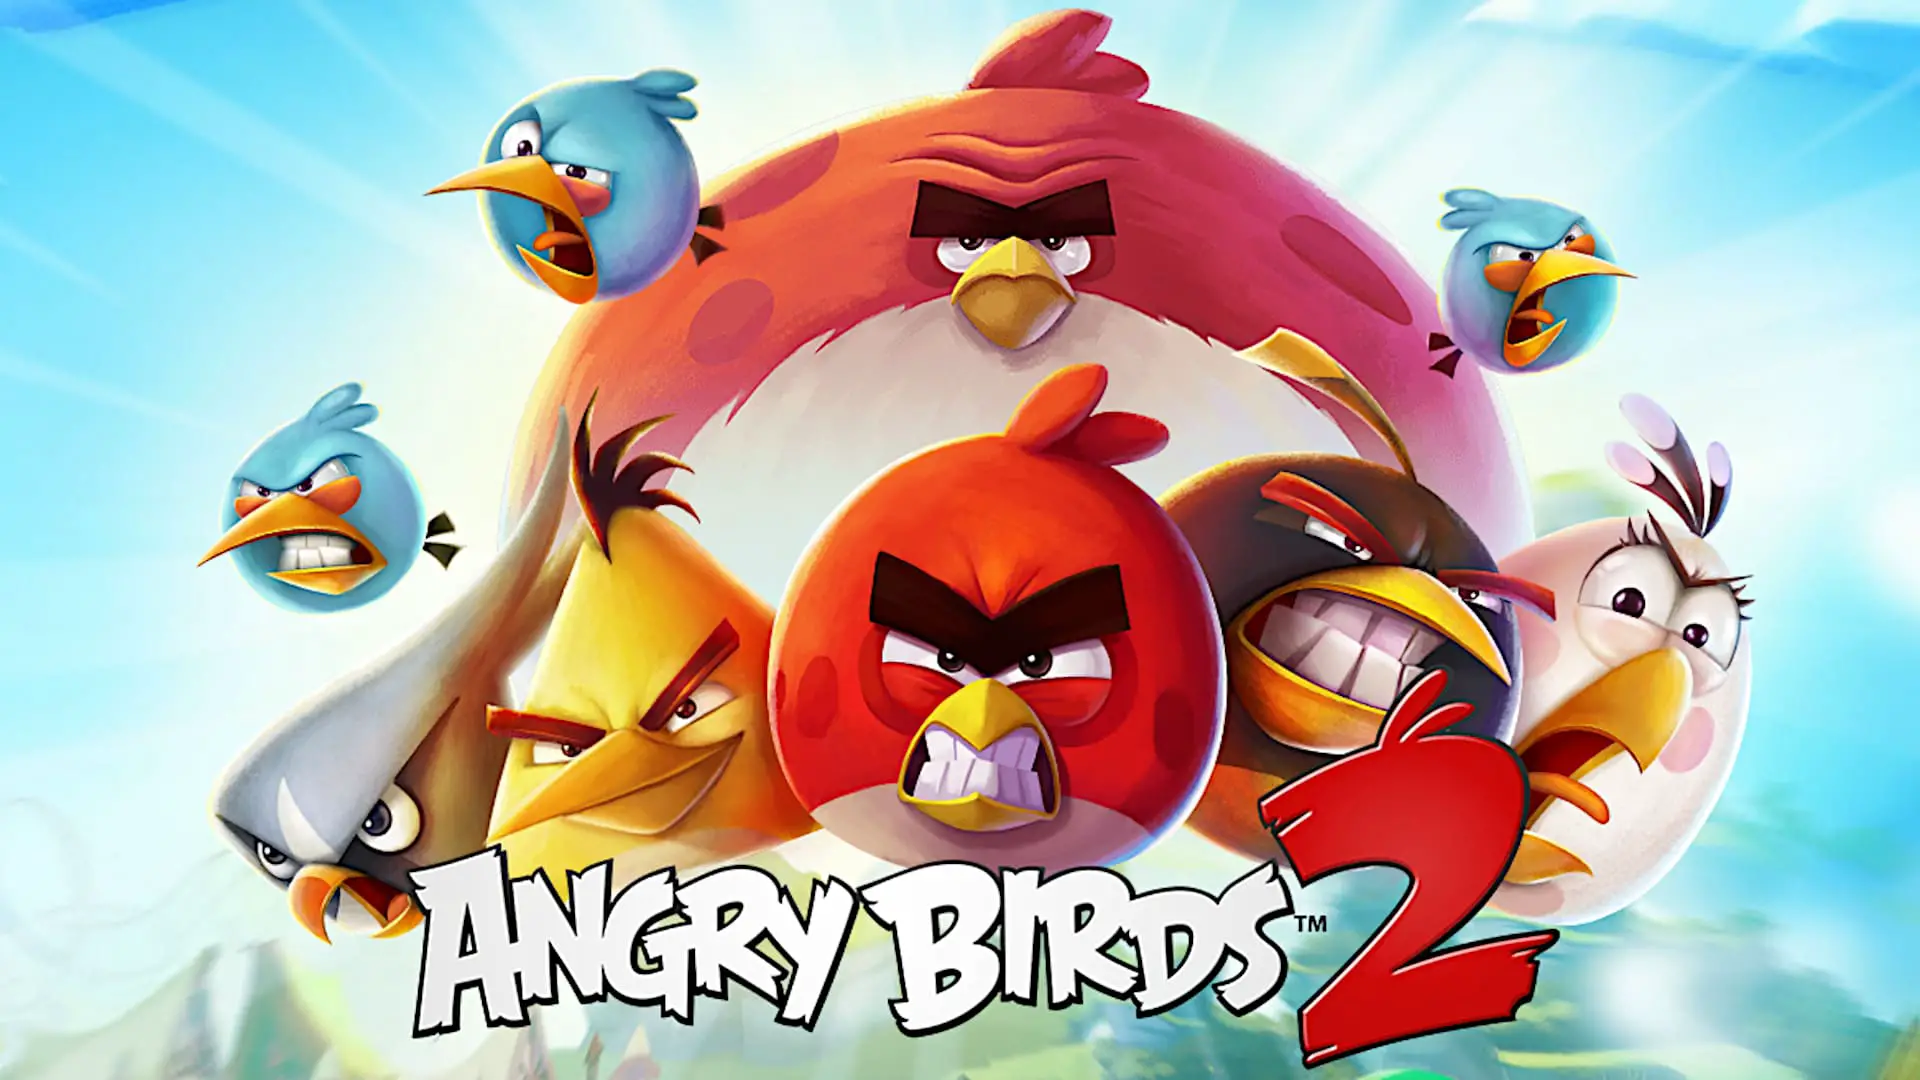 Angry Birds 2 has brought $500m for the Rovio